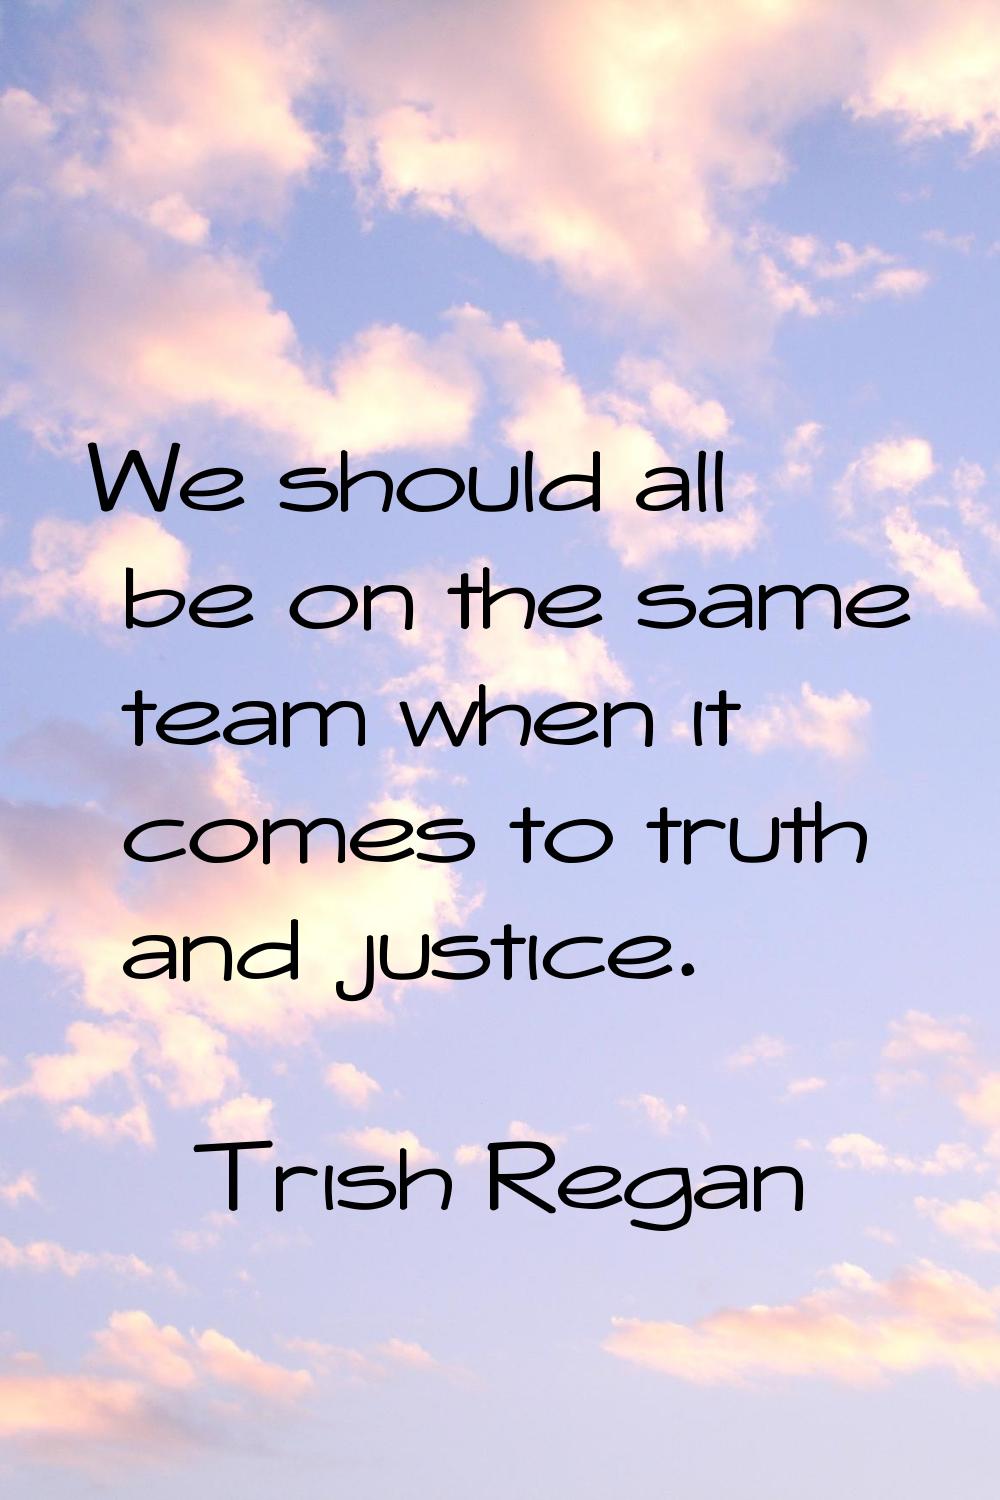 We should all be on the same team when it comes to truth and justice.